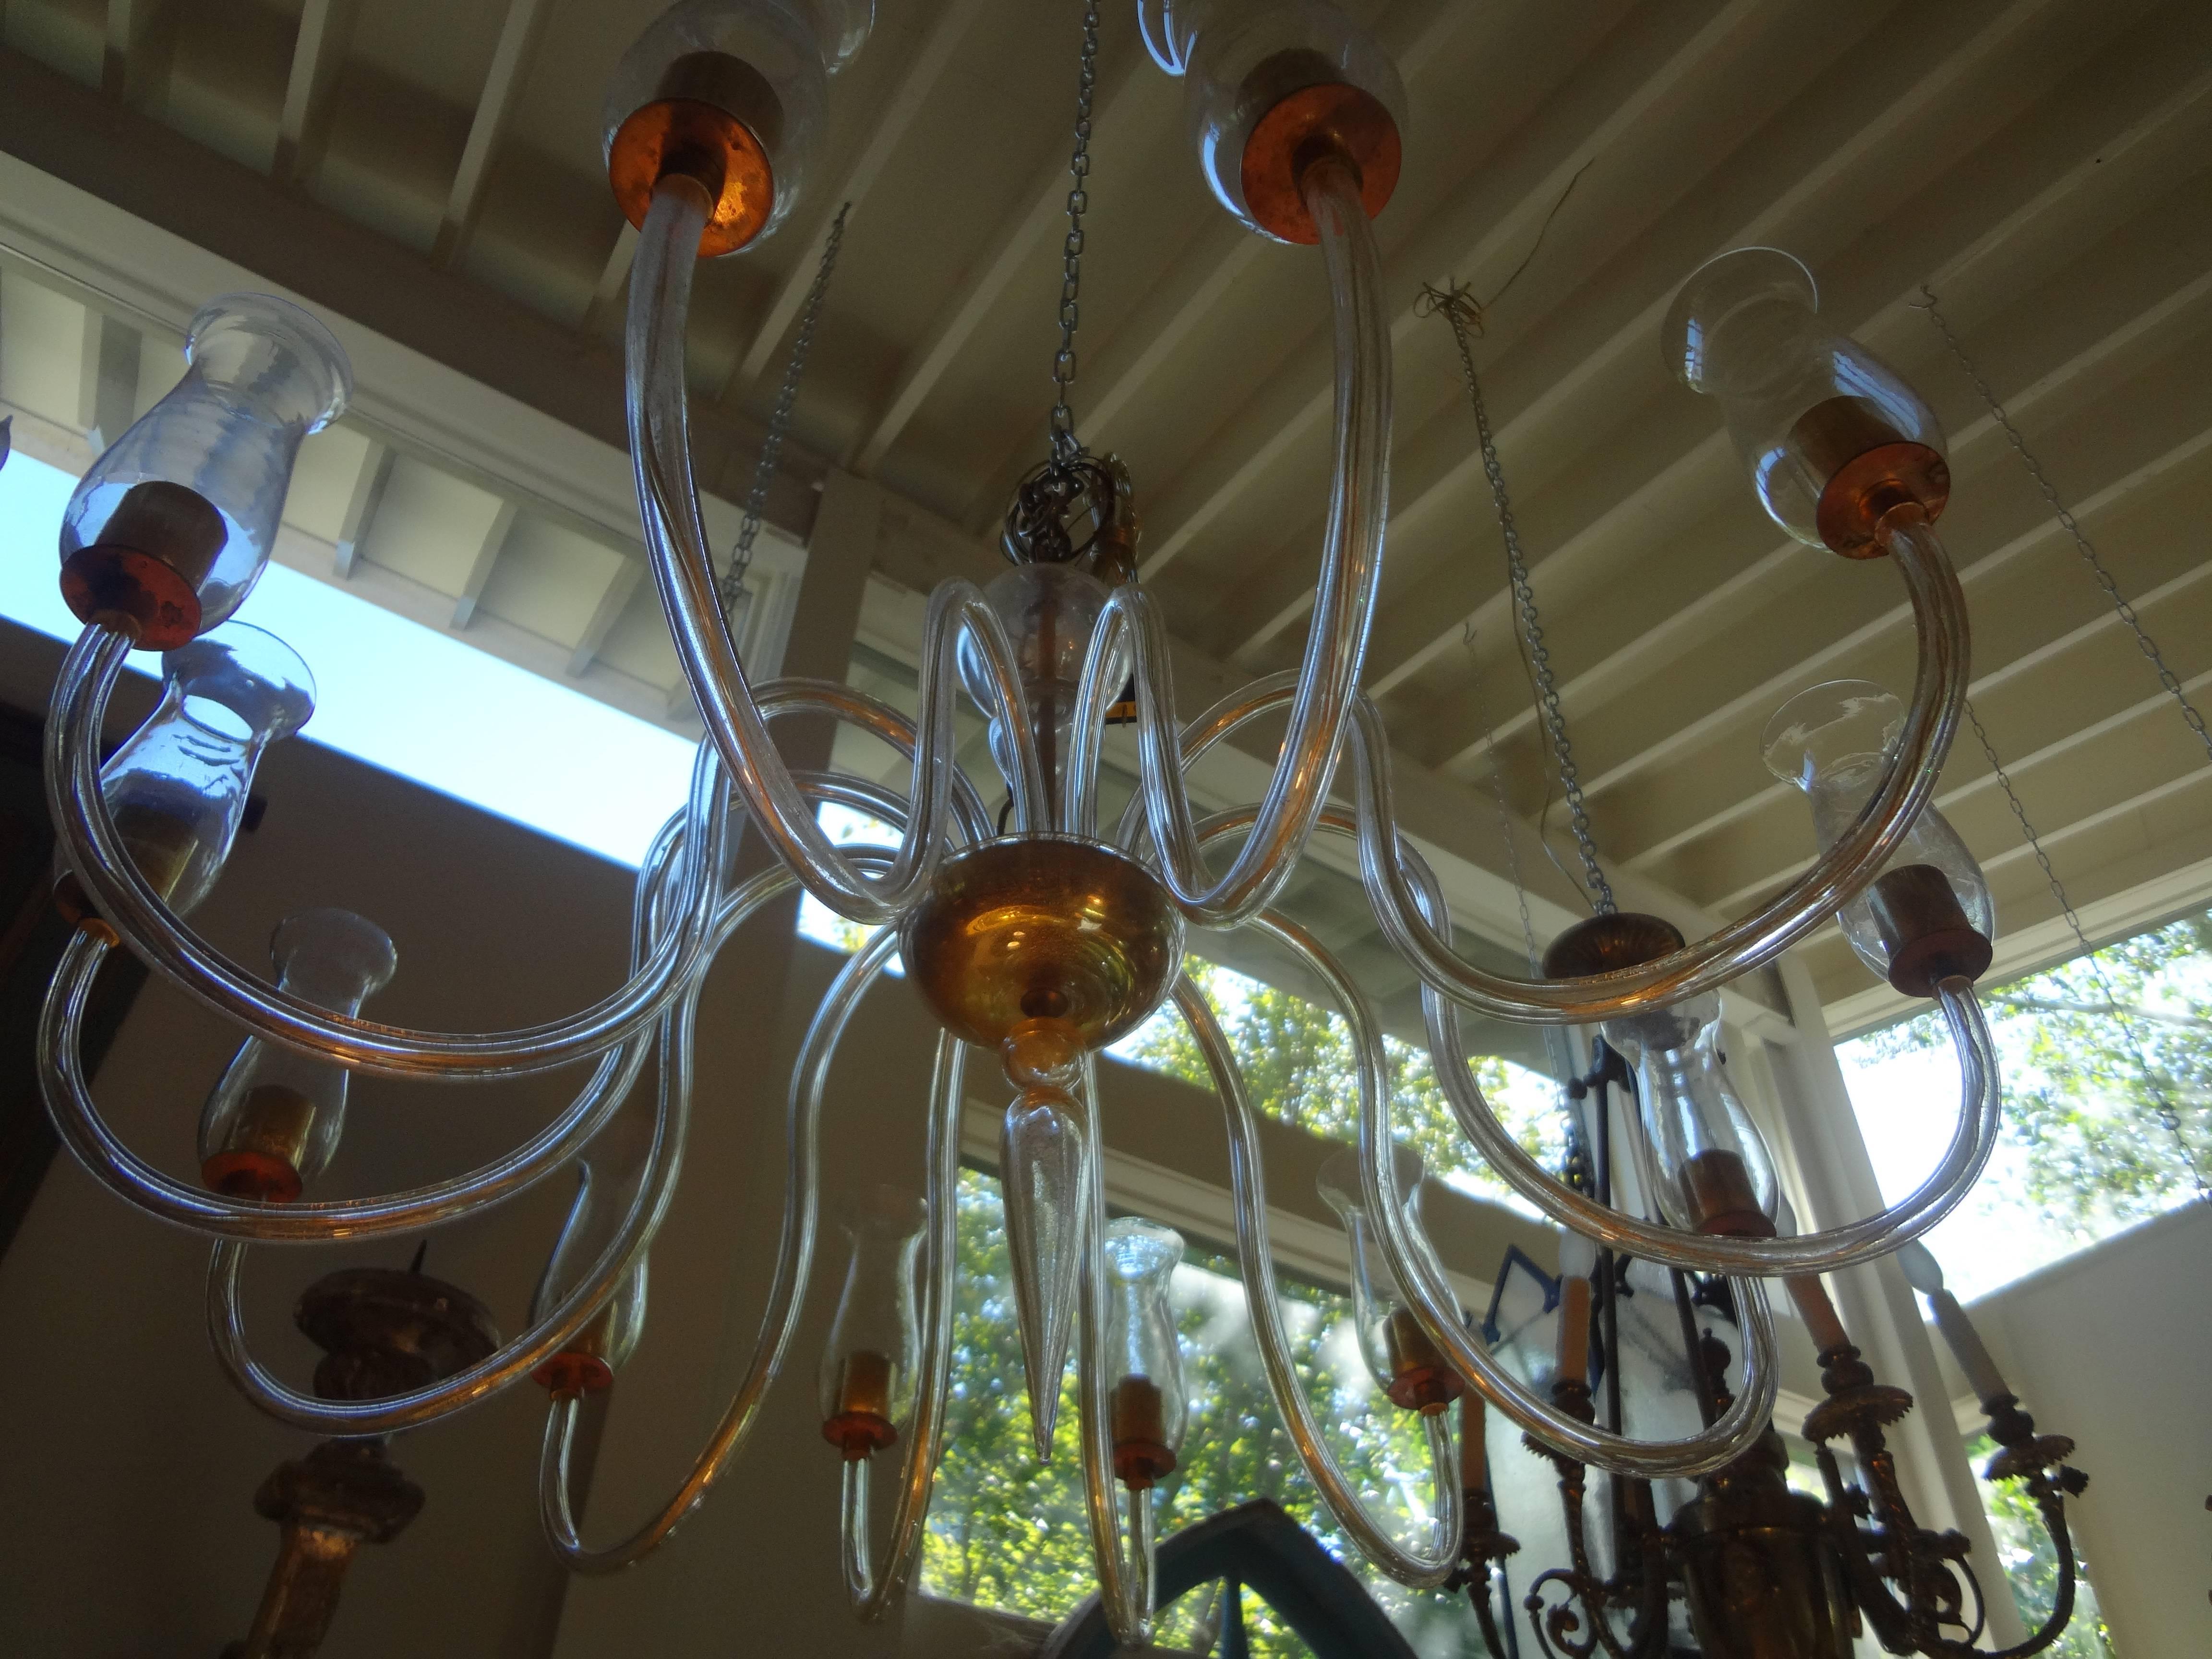 Stunning Venetian Barovier inspired twelve-light chandelier of clear handblown glass infused with gold. Each branch holds a beautifully shaped shade sitting on a brass fitting. This classic 1940s, Italian chandelier has been newly wired for the U.S.